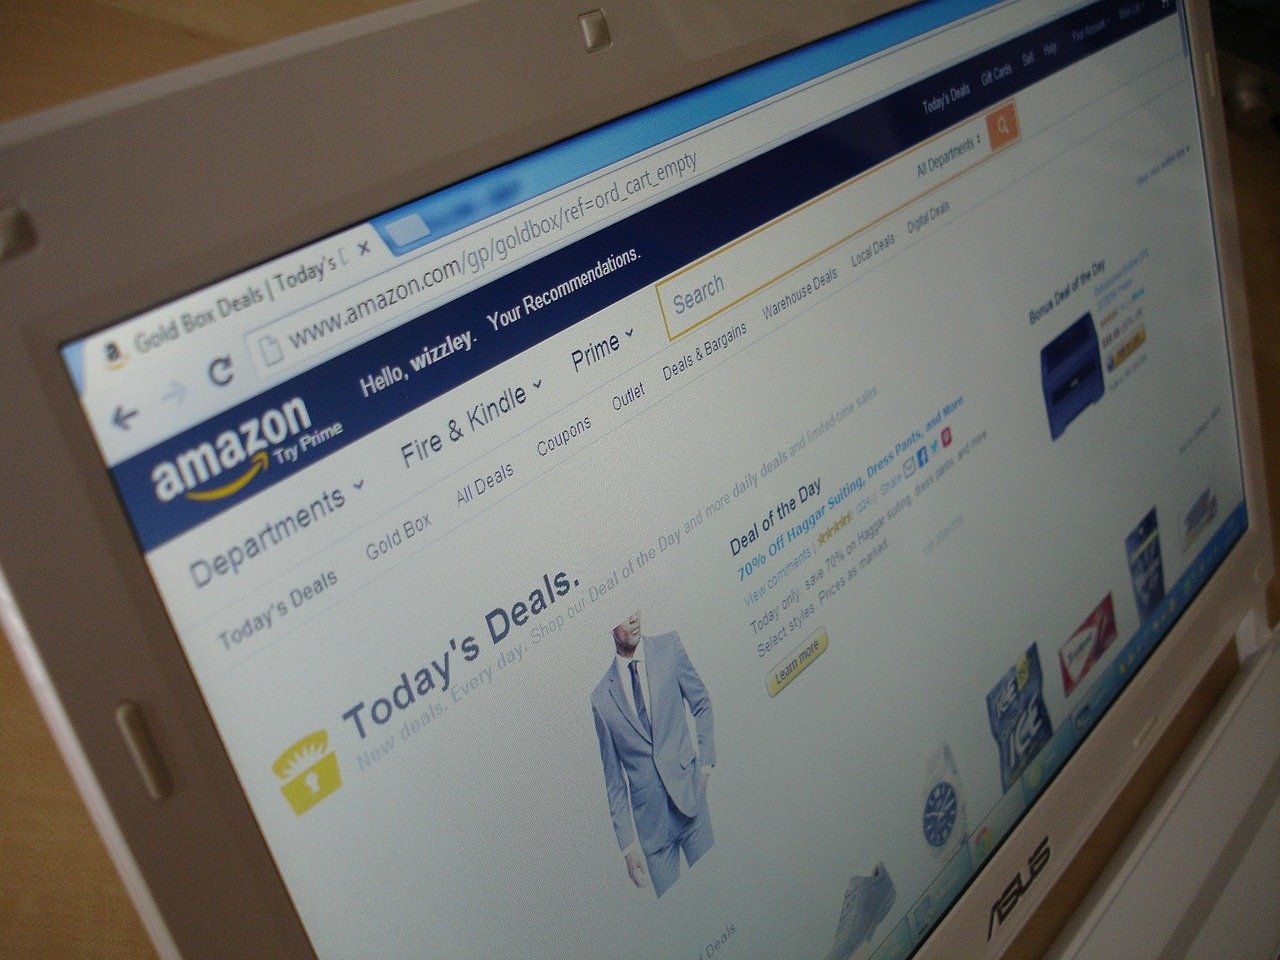 Amazon accused of illegal election interference following Alabama union vote